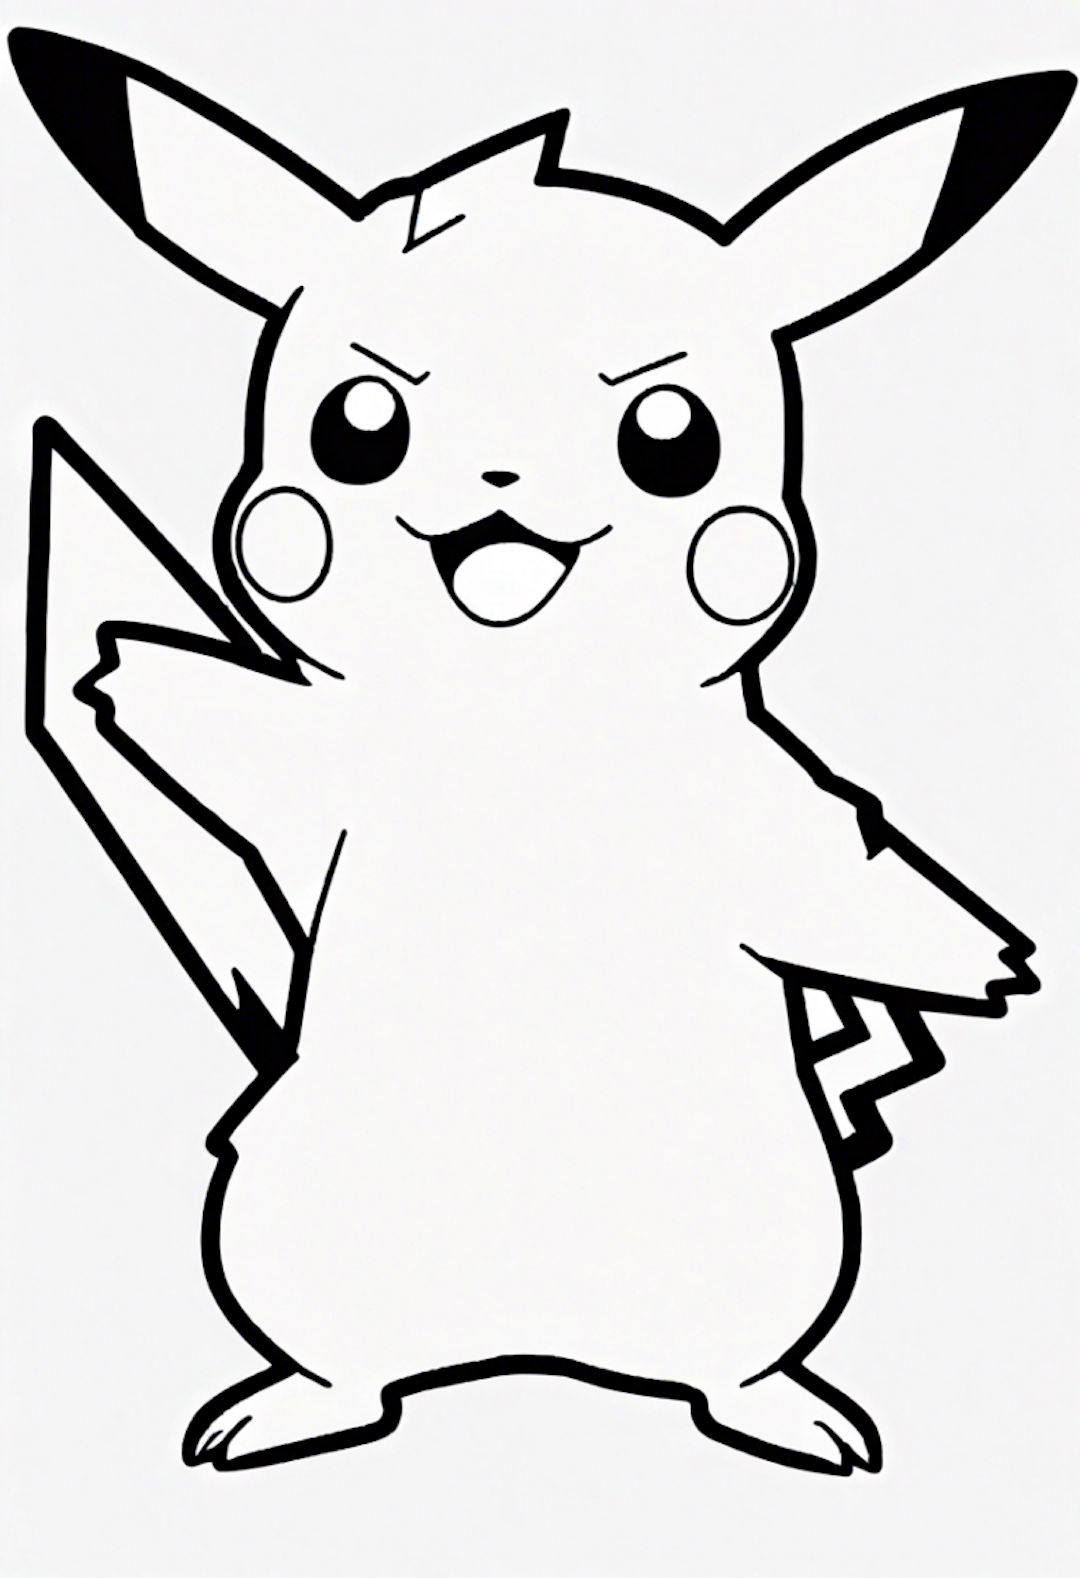 Relieved Pikachu coloring pages